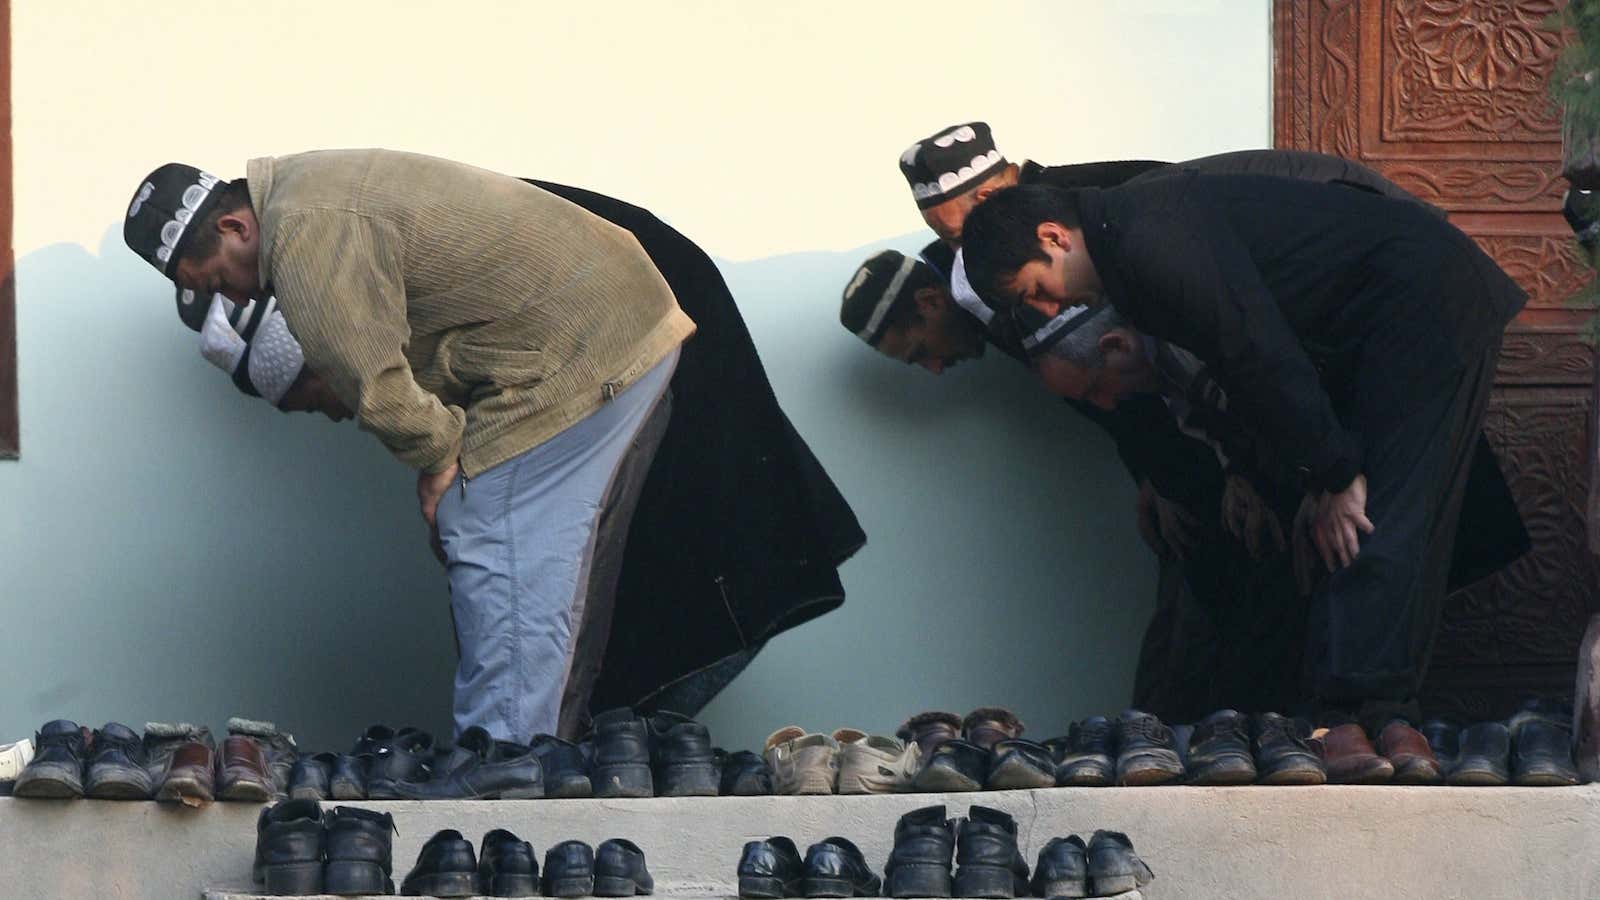 Men pray at a mosque in the village of Nurabad, some 40 km (25 miles) west of the Tajik capital, Dushanbe.